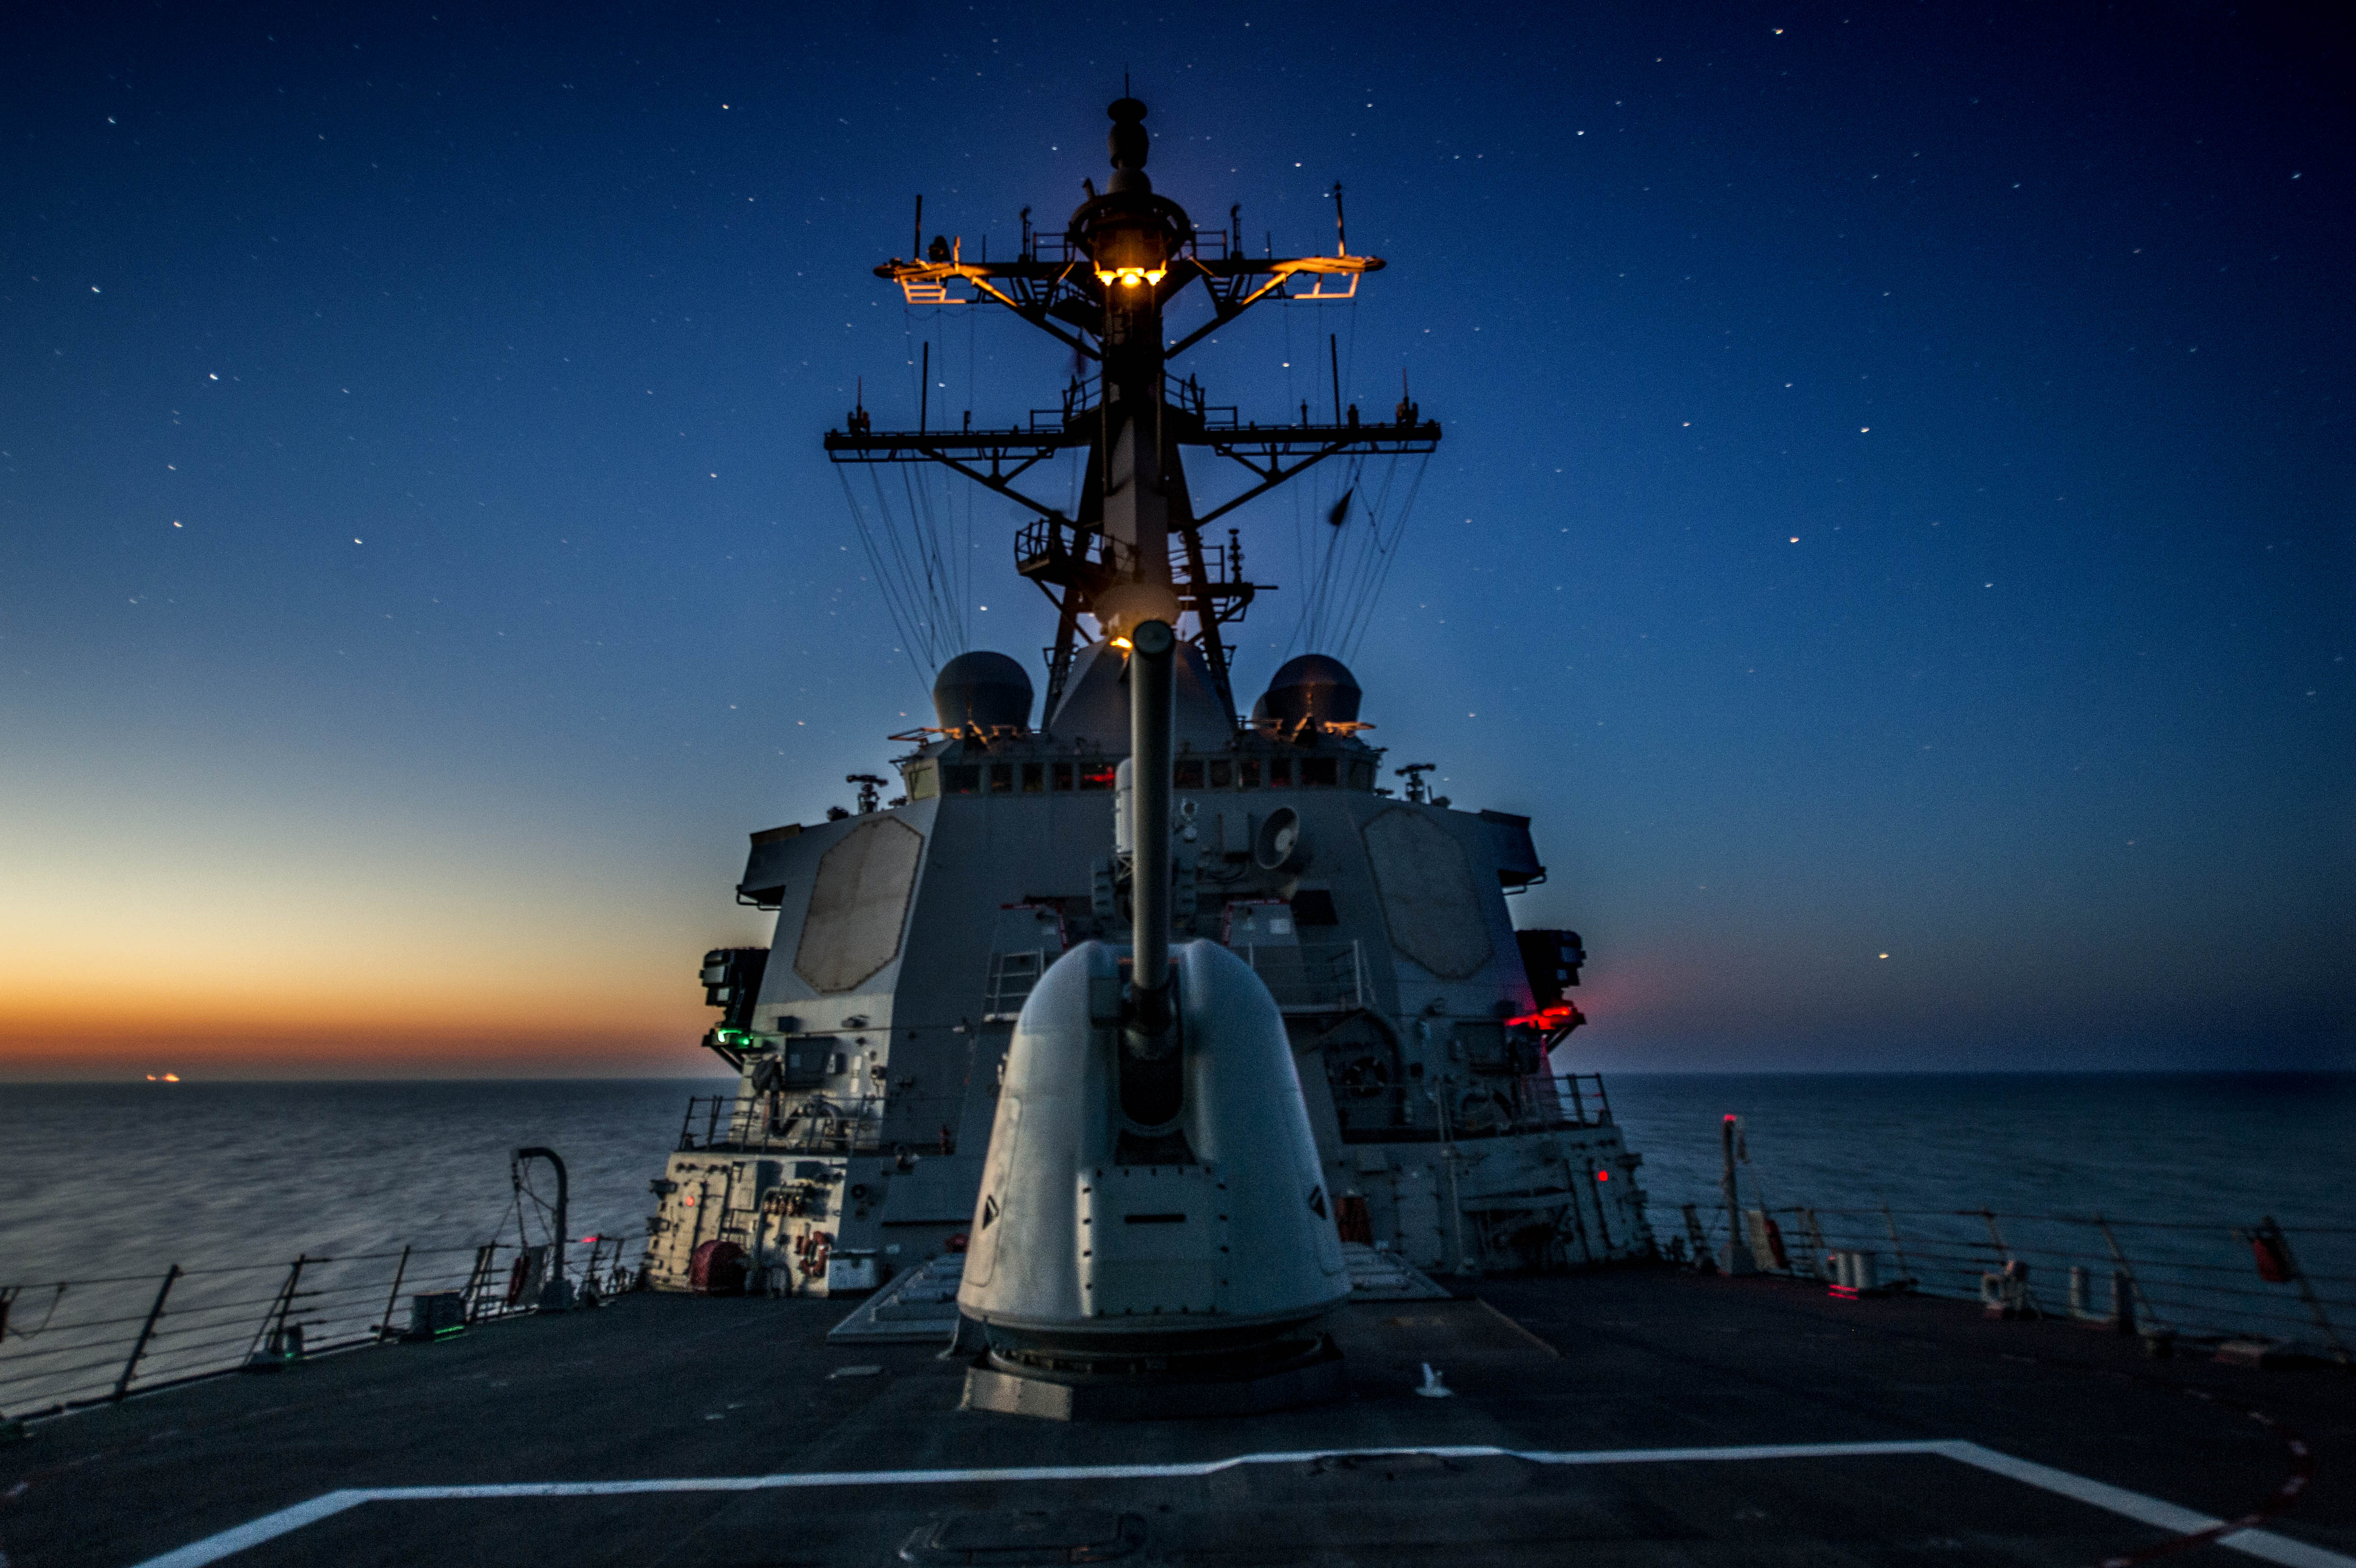 USS Donald Cook (DDG-75) transits the Black Sea on April 21, 2014. US Navy Photo